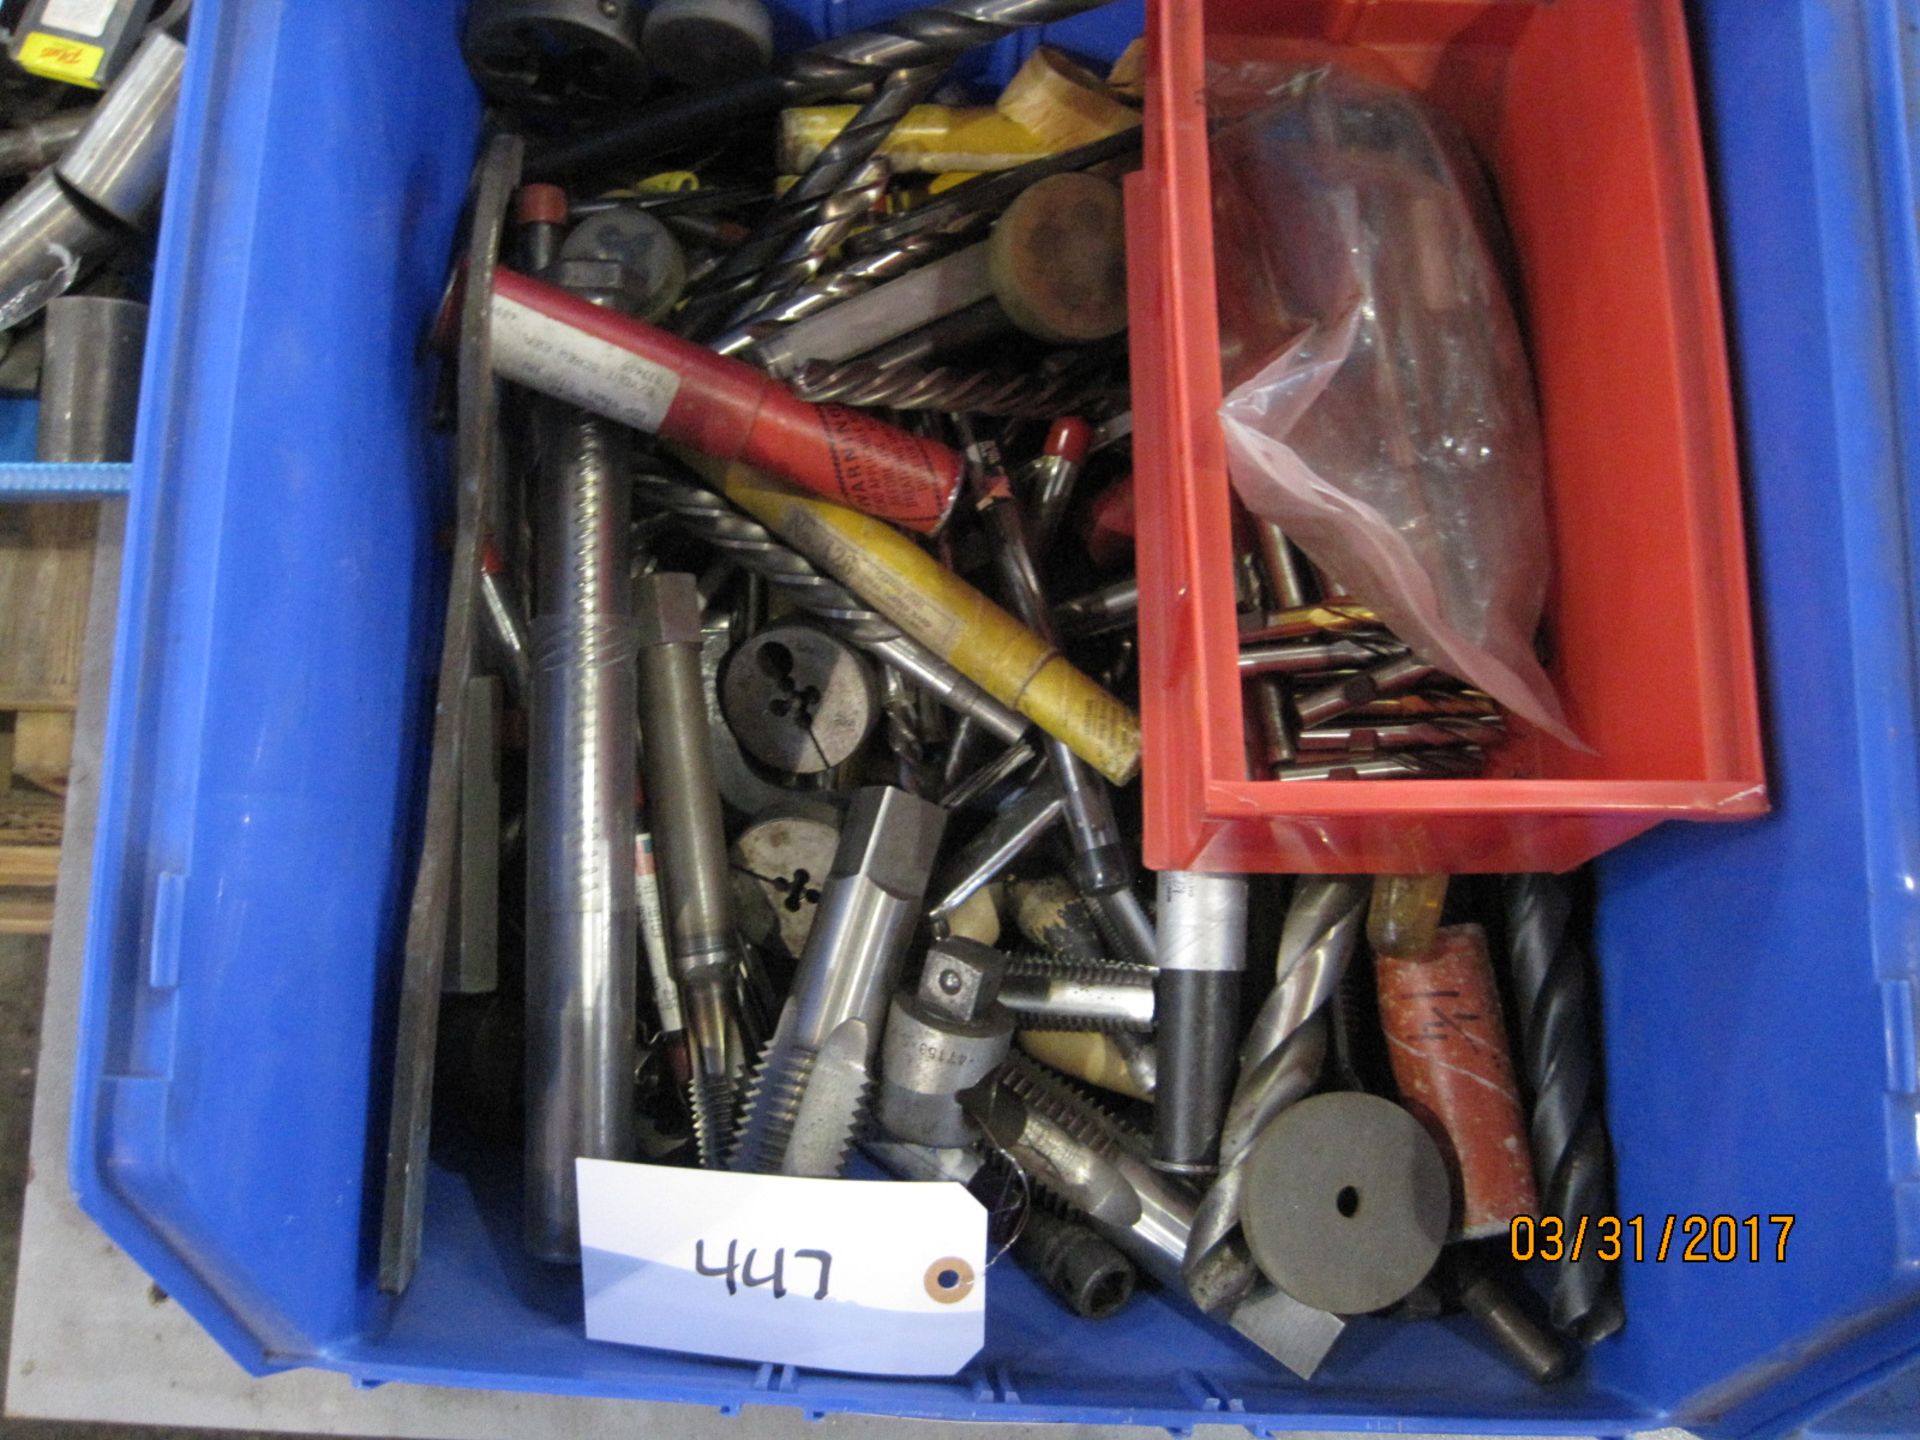 Mills, taps and Drill bits